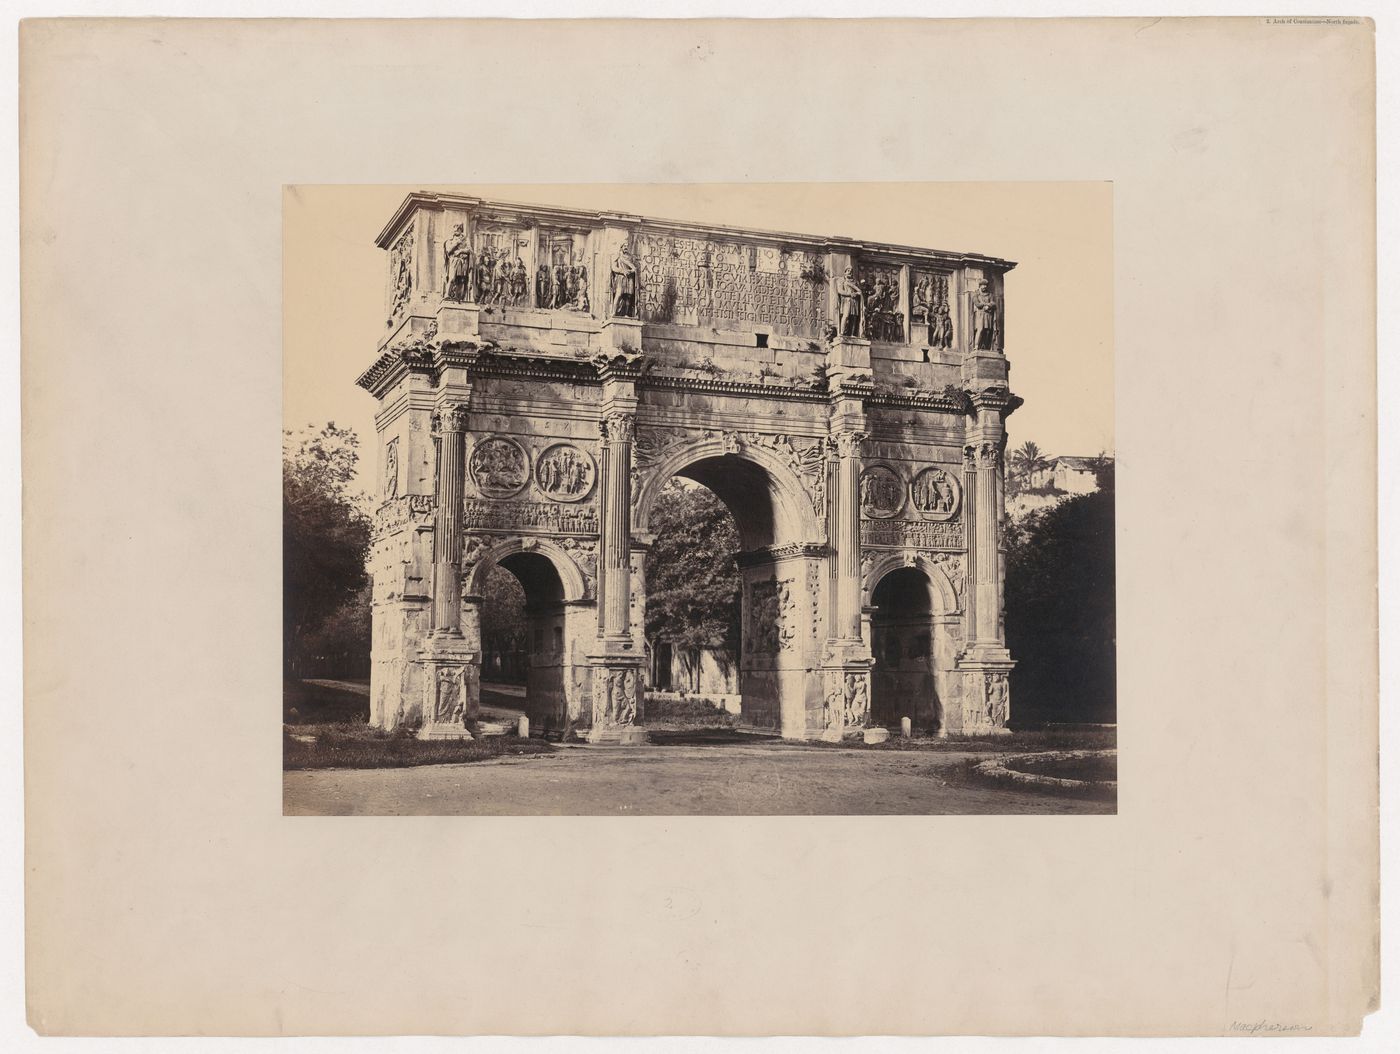 View of the north façade of the Arch of Constantine, Rome, Italy